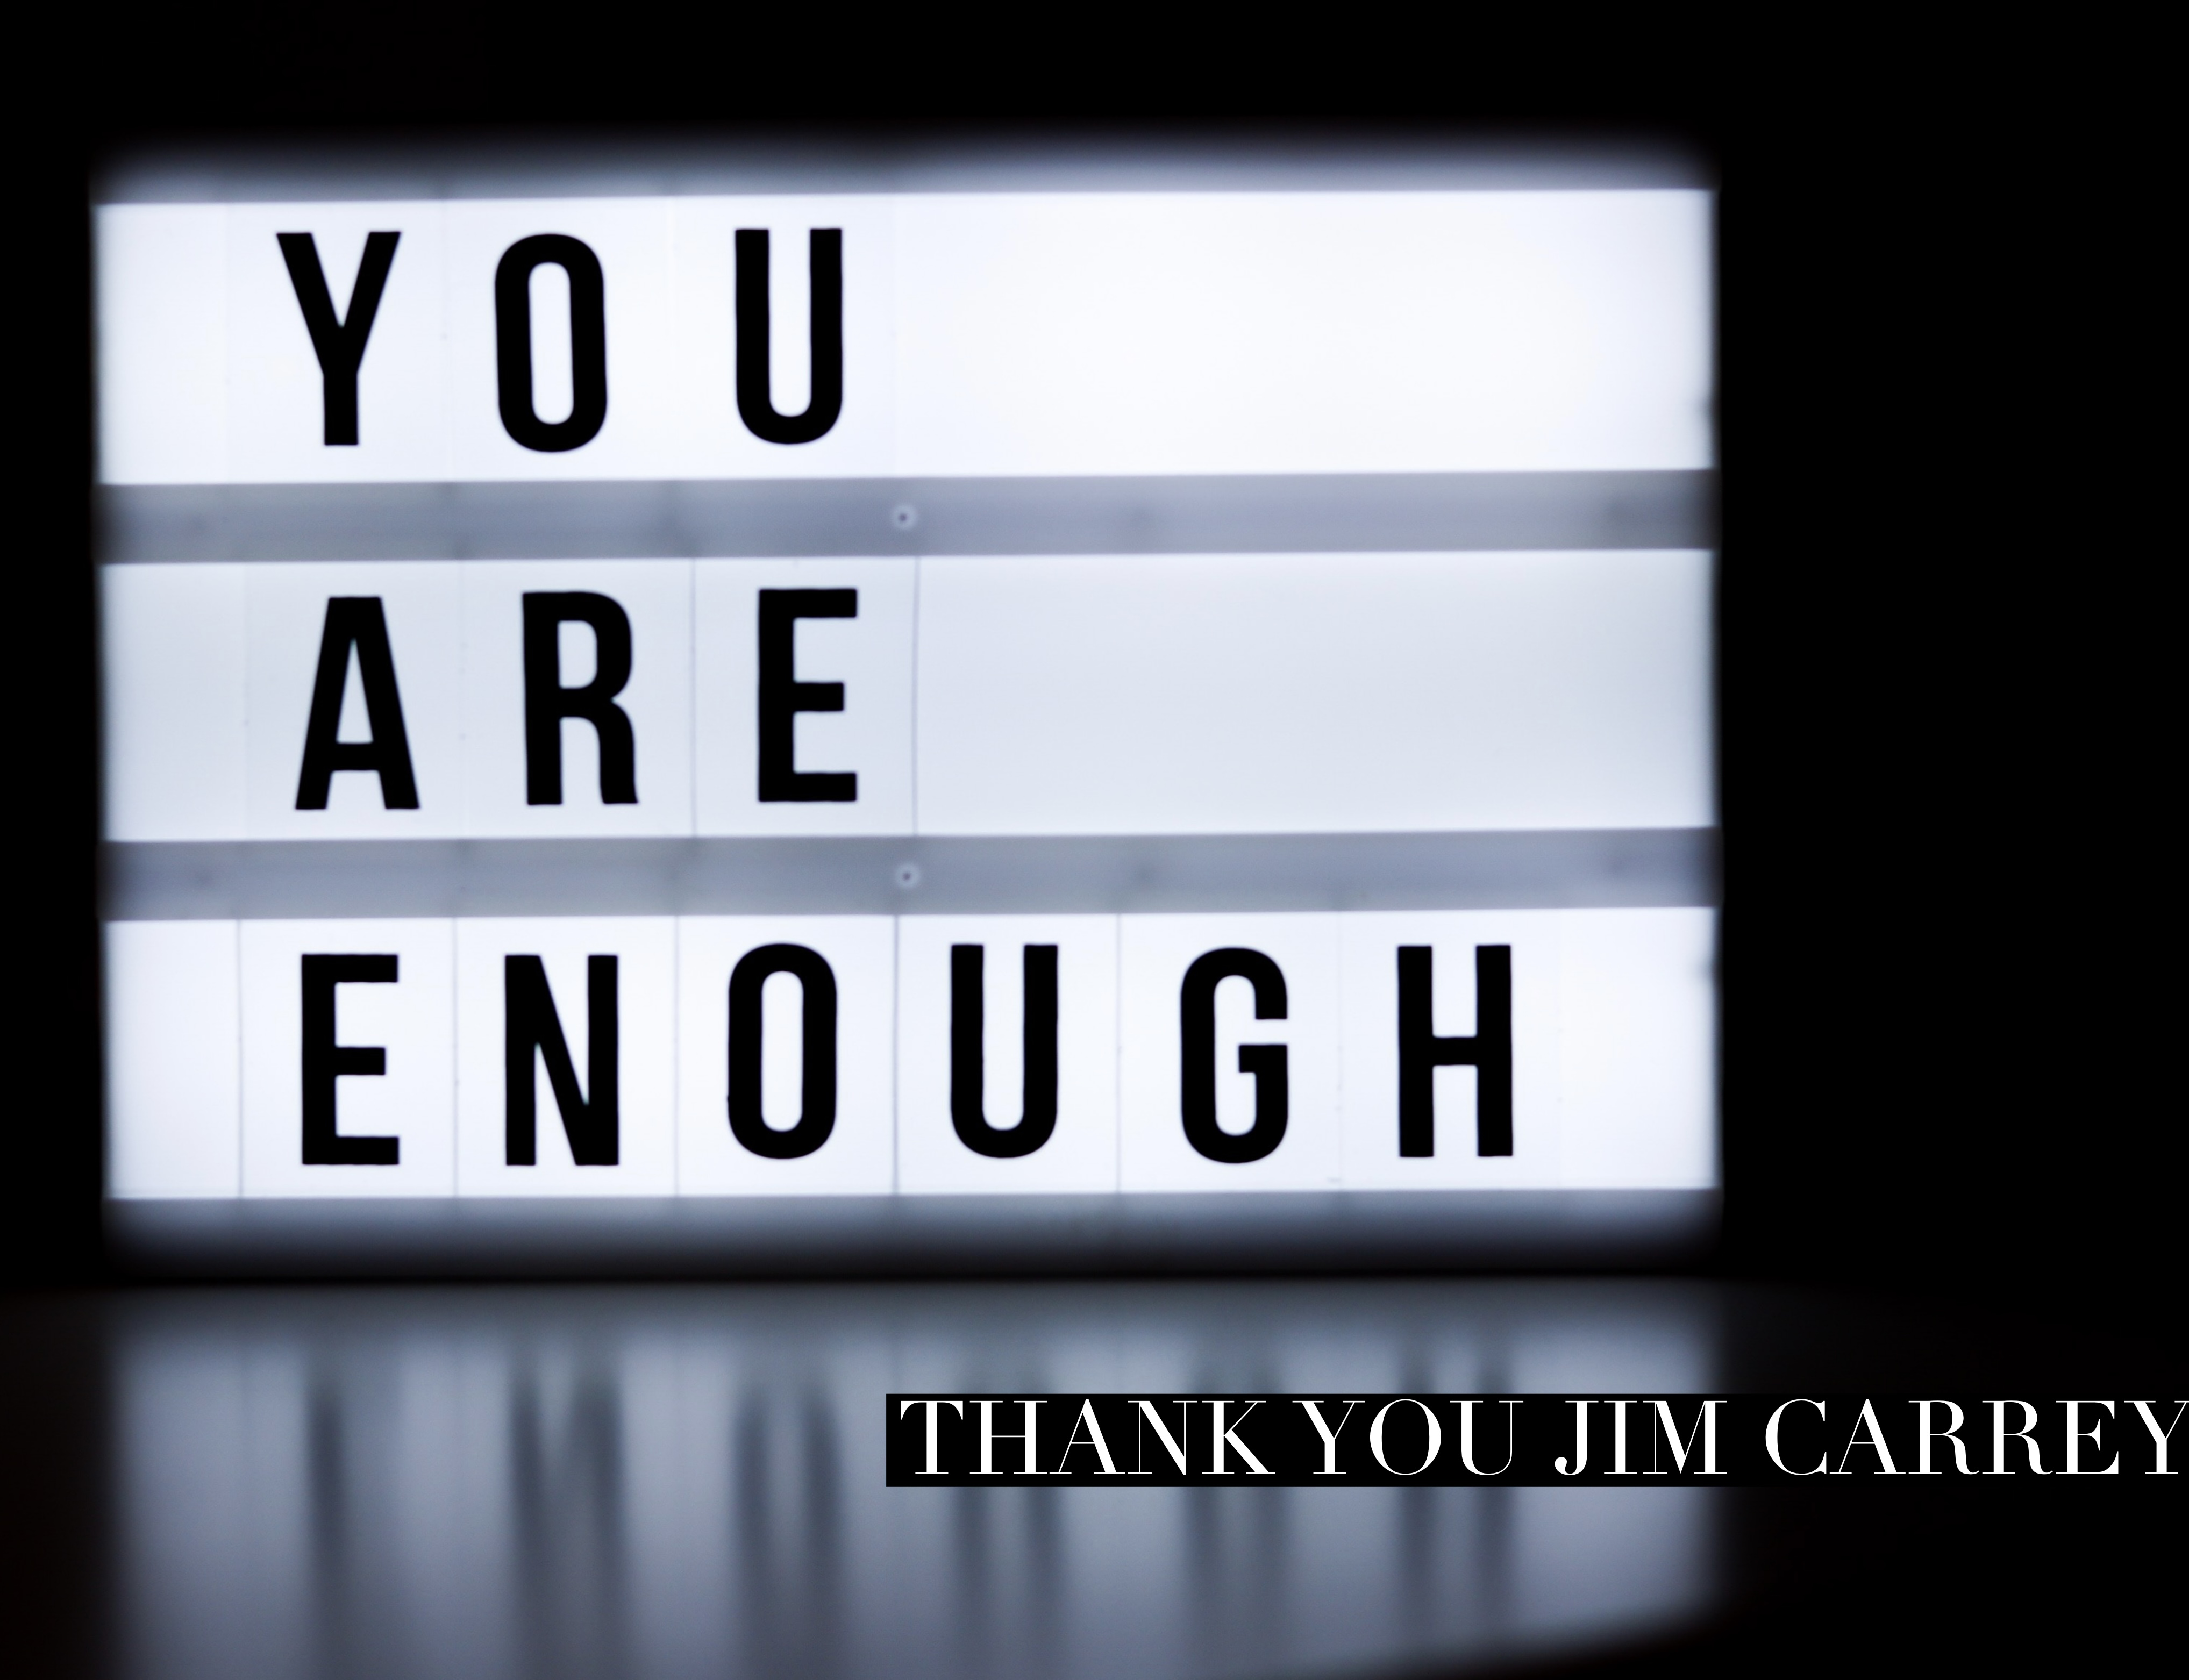 You are enough…